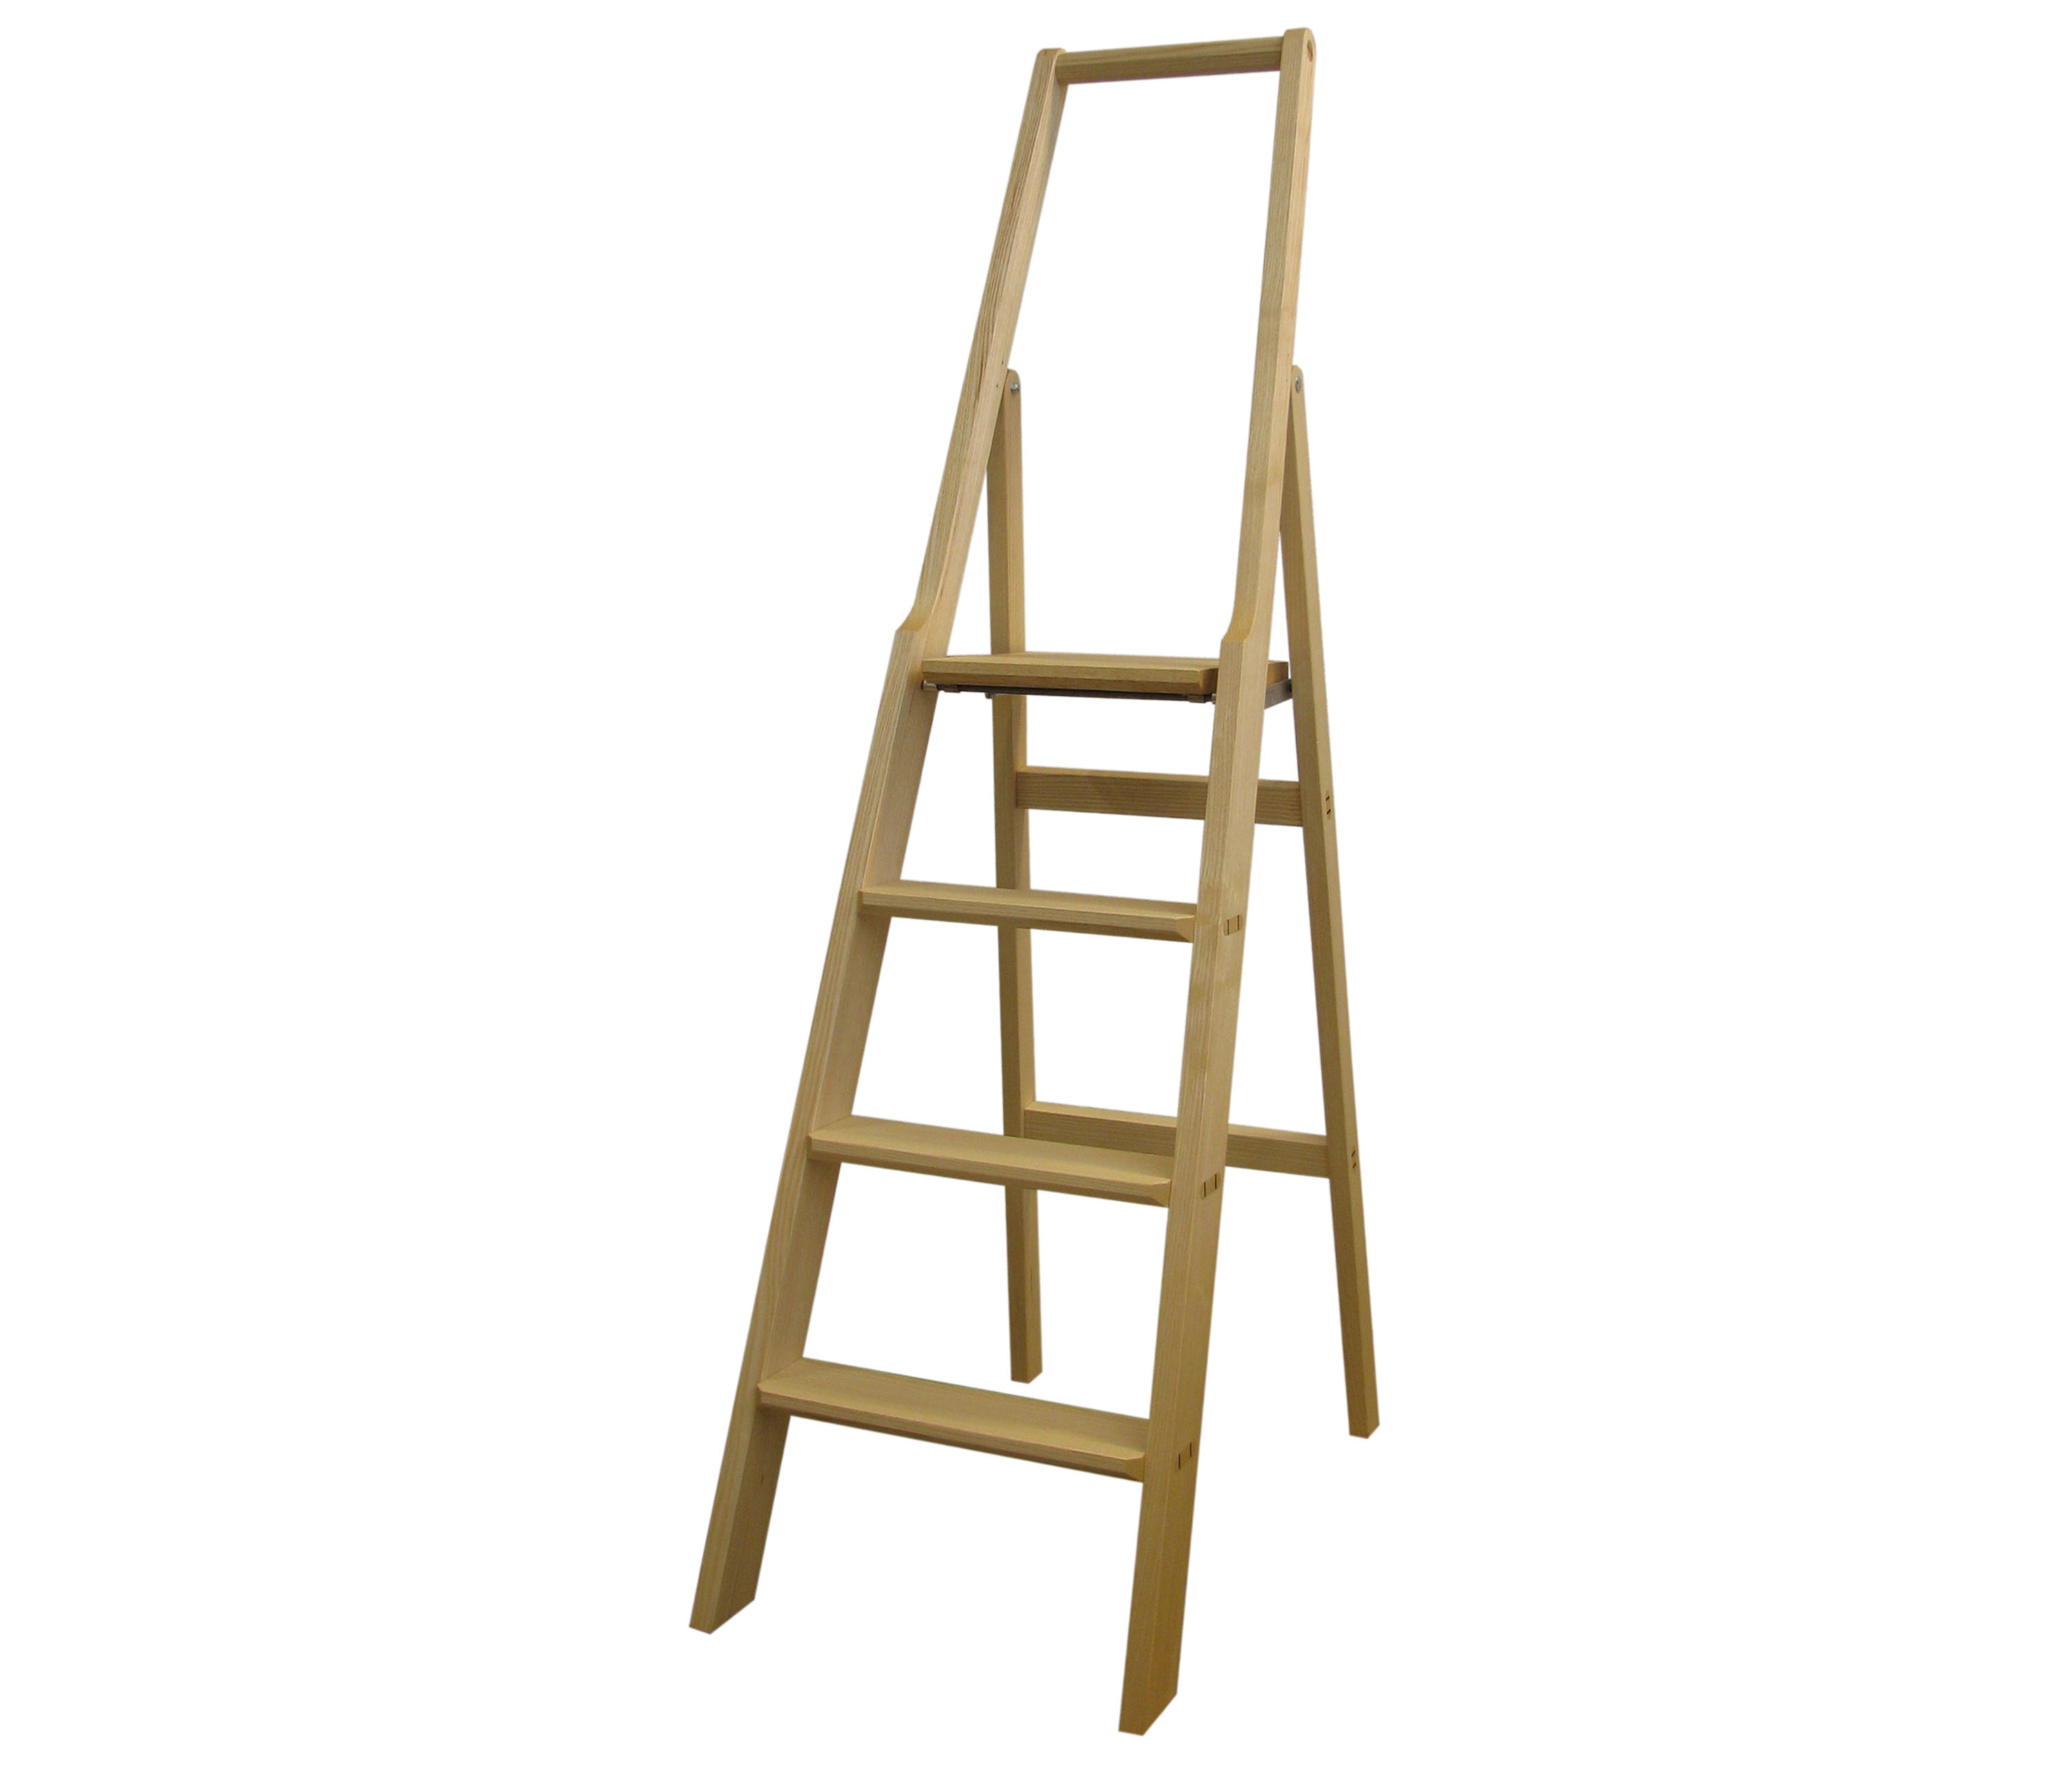 STEP UP STEP LADDER - Library ladders from Olby Design | Architonic